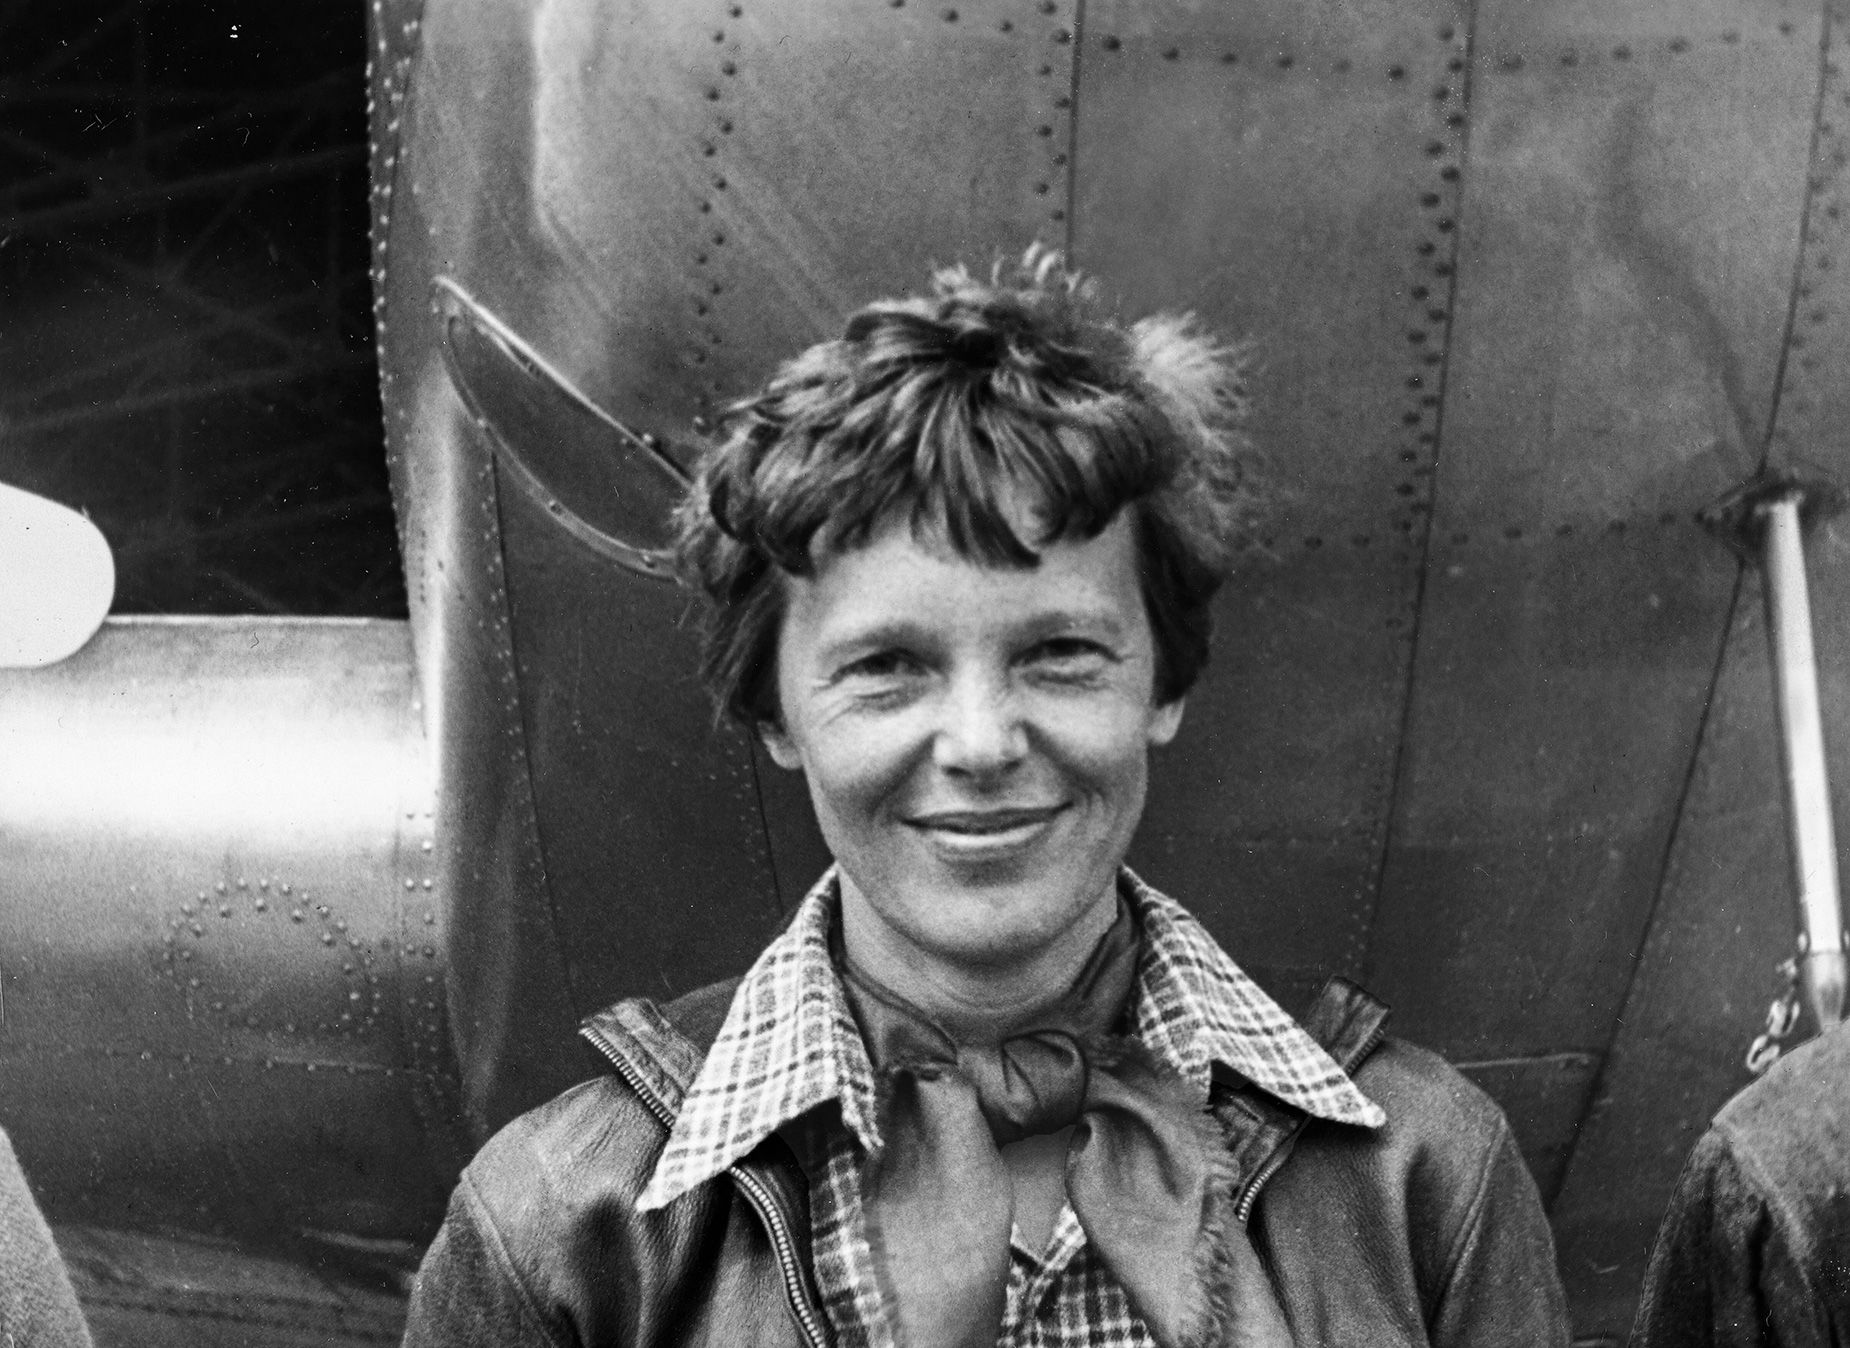 Amelia Earhart is photographed with her Lockheed Model 10-E Electra, the aircraft she used in her attempted flight around the world. Earhart and the plane went missing on July 2, 1937.